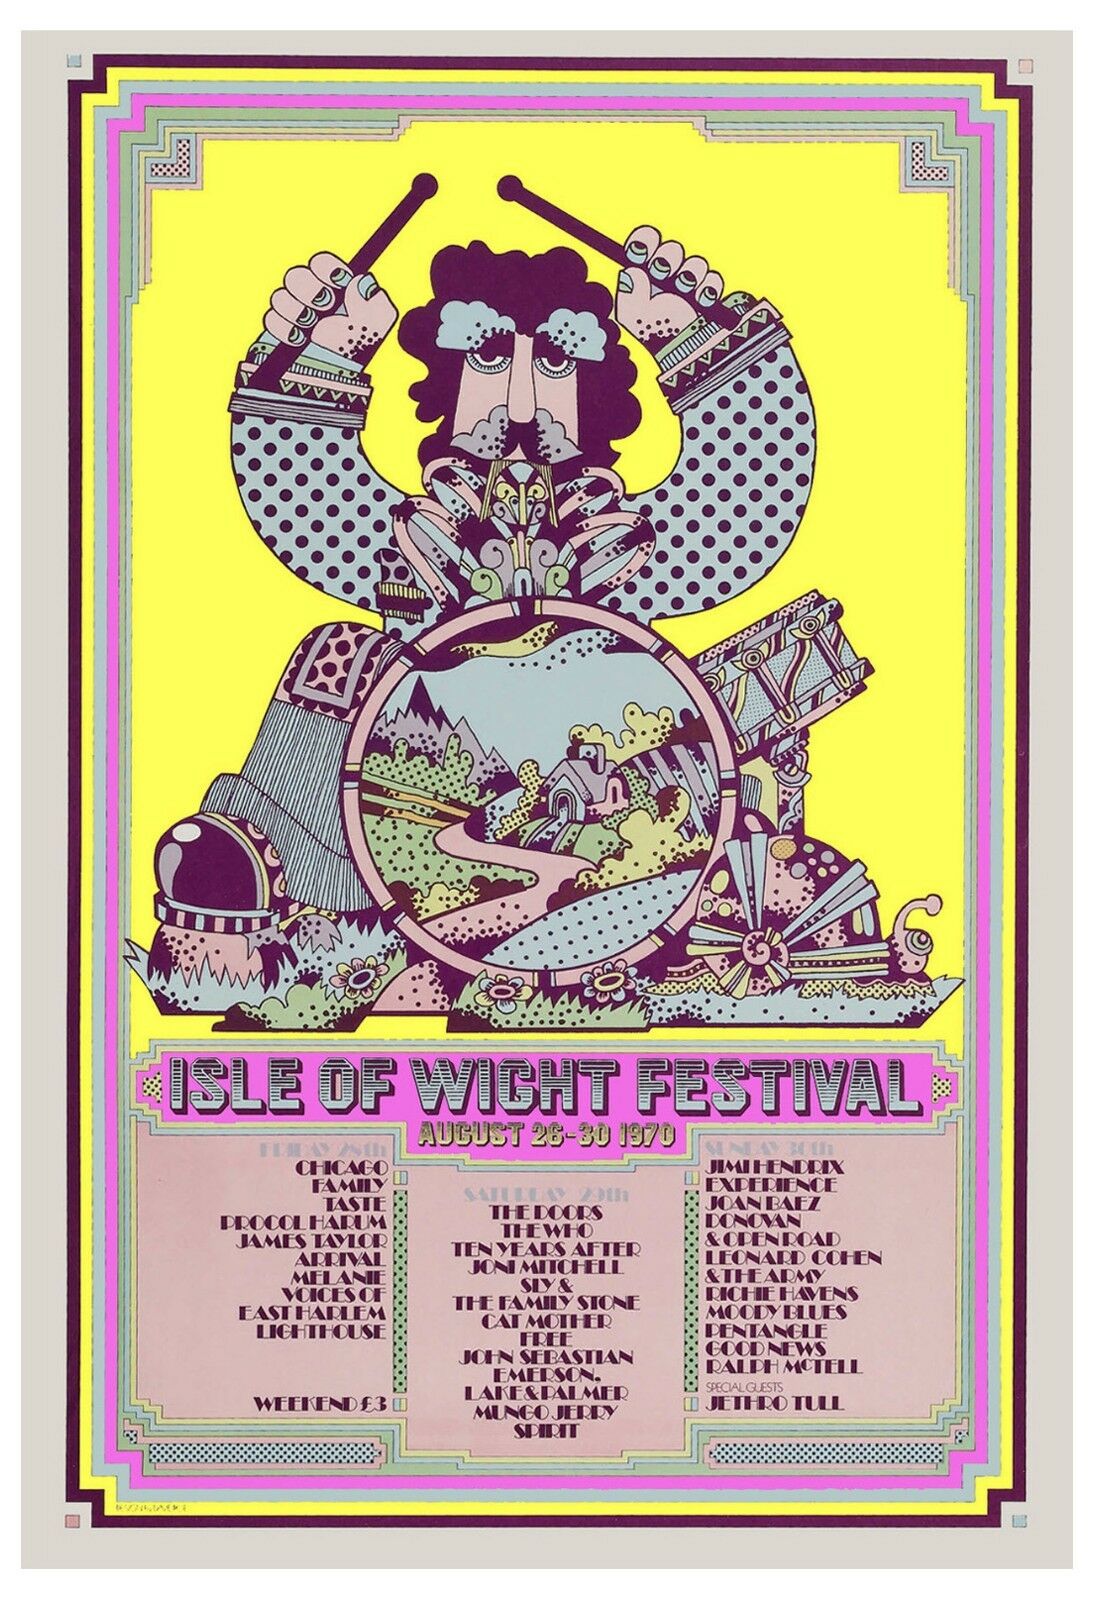 Classic Rock: Jimi Hendrix At Isle Of Wight Concert Poster 1970   13x19